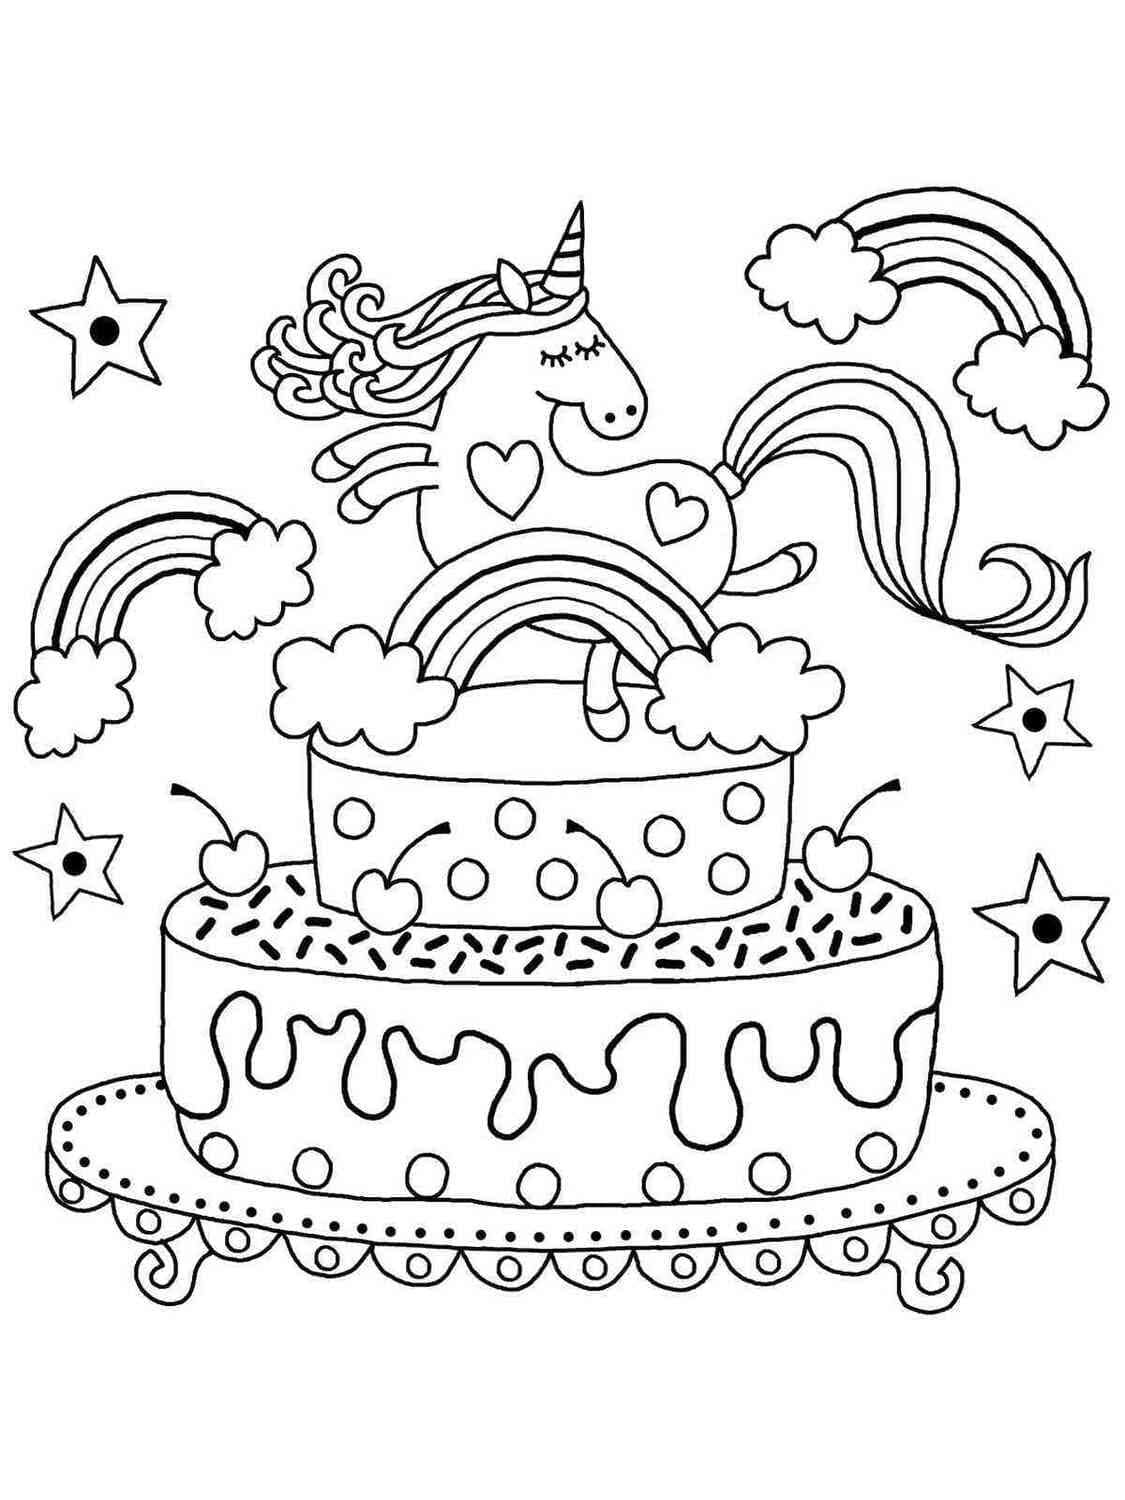 Birthday Cake Coloring Page - Get Coloring Pages